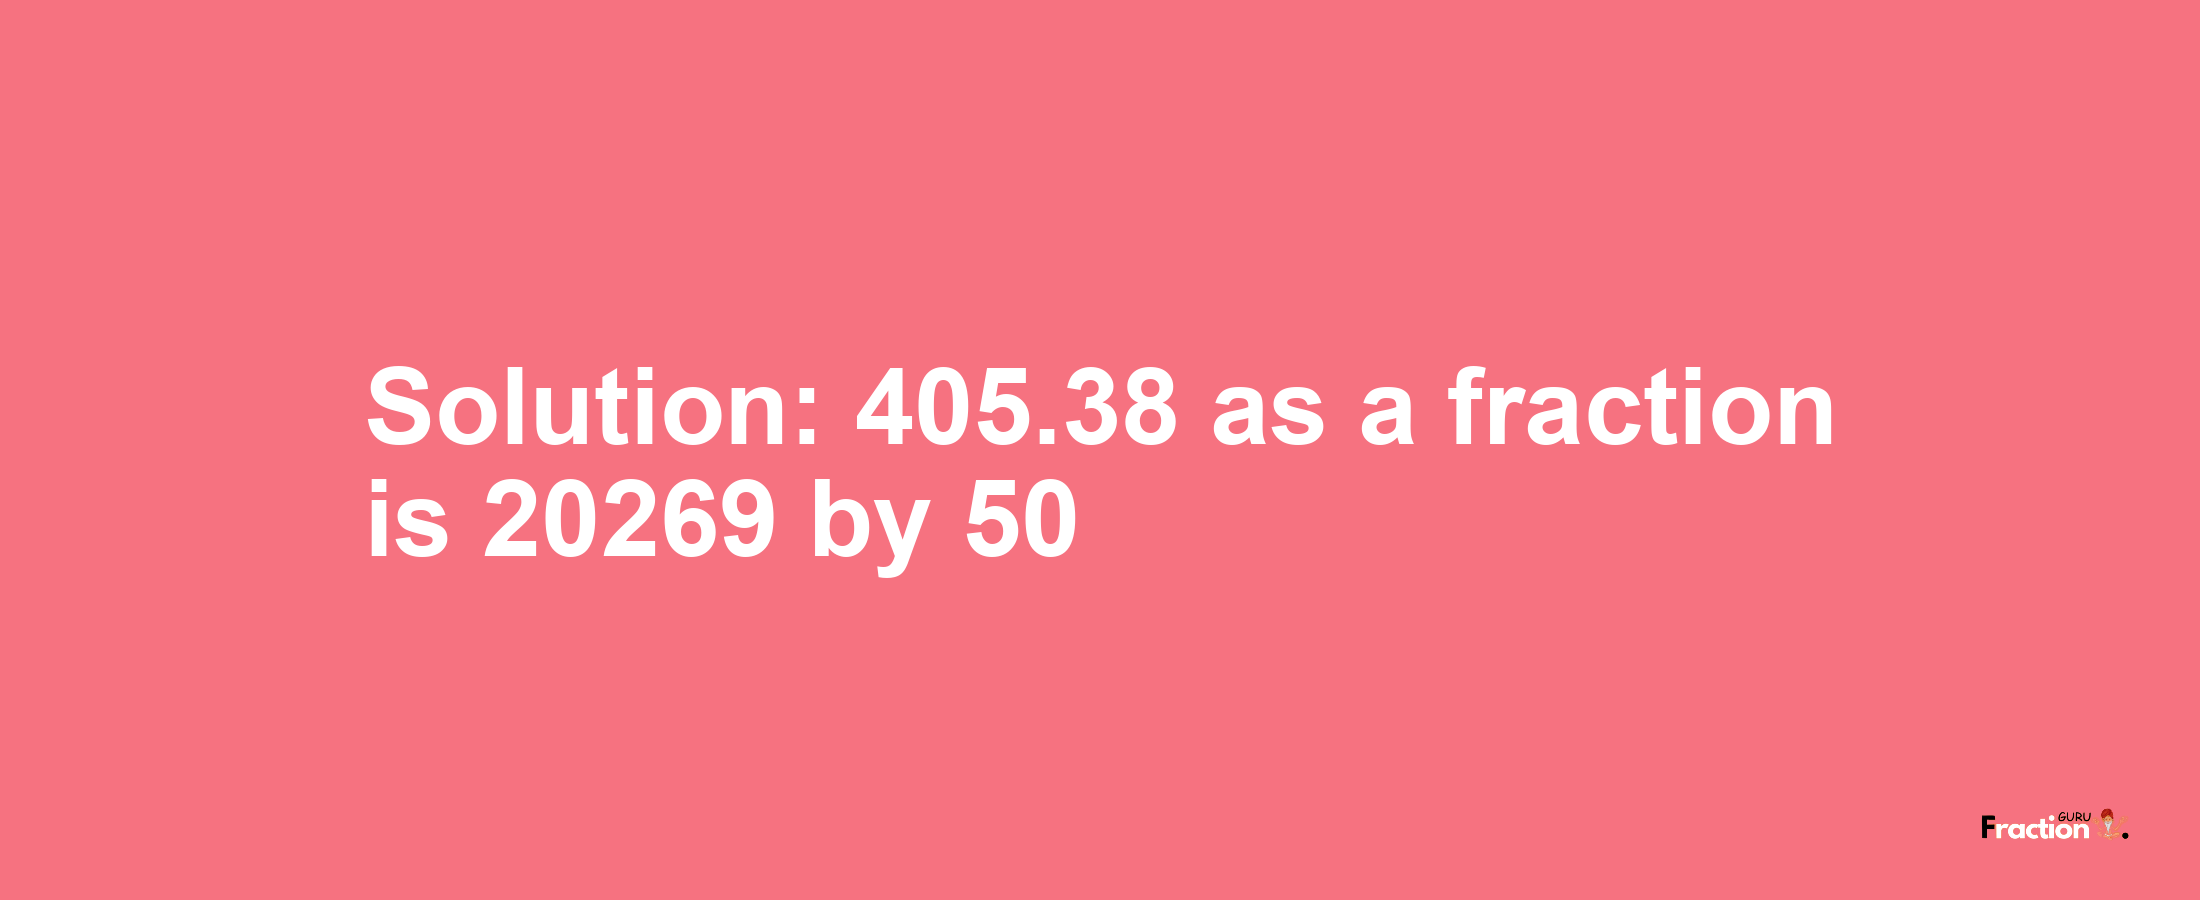 Solution:405.38 as a fraction is 20269/50